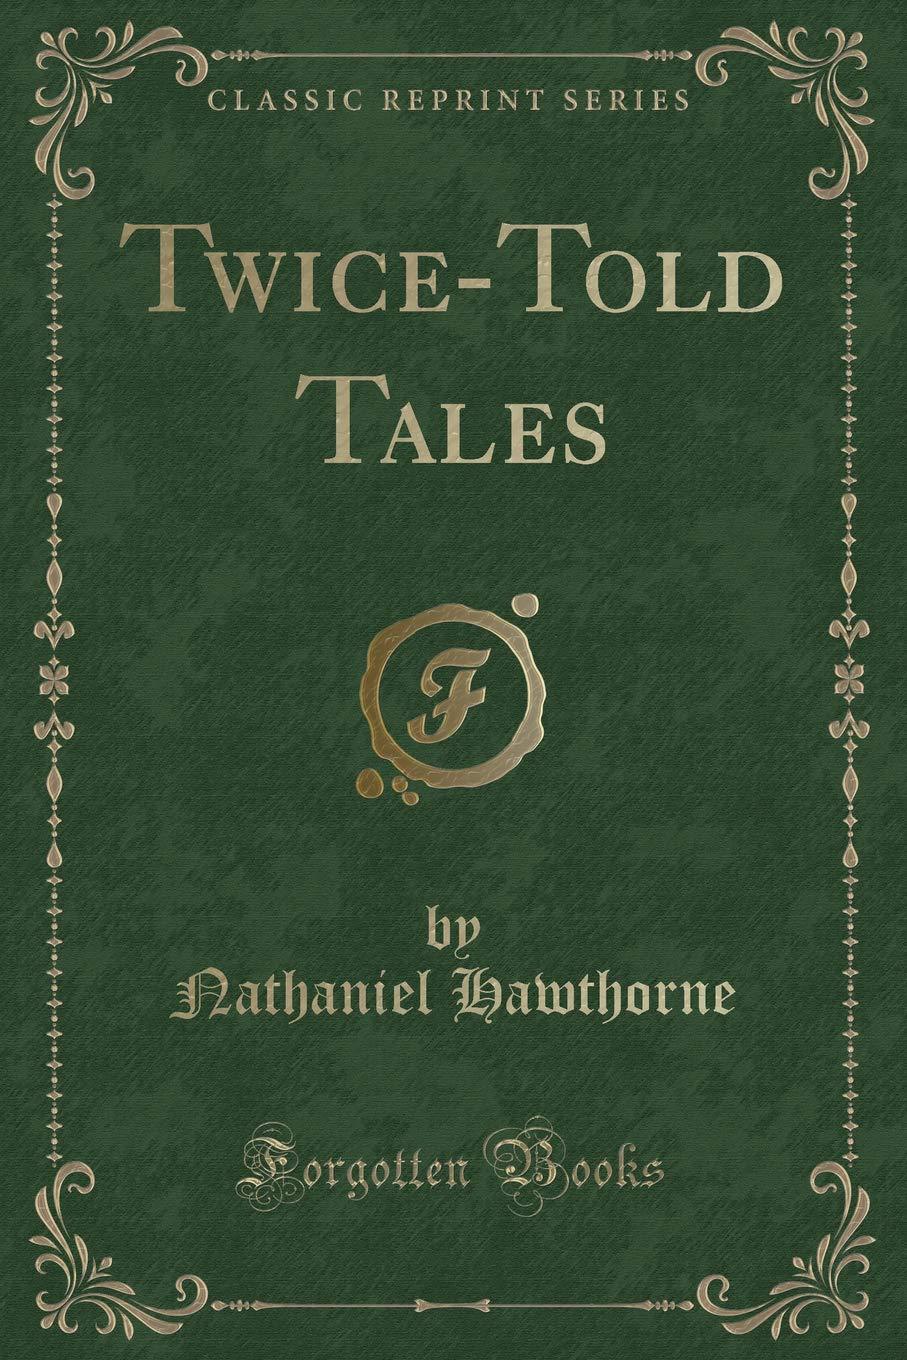 Twice Told Tales by Nathaniel Hawthorne